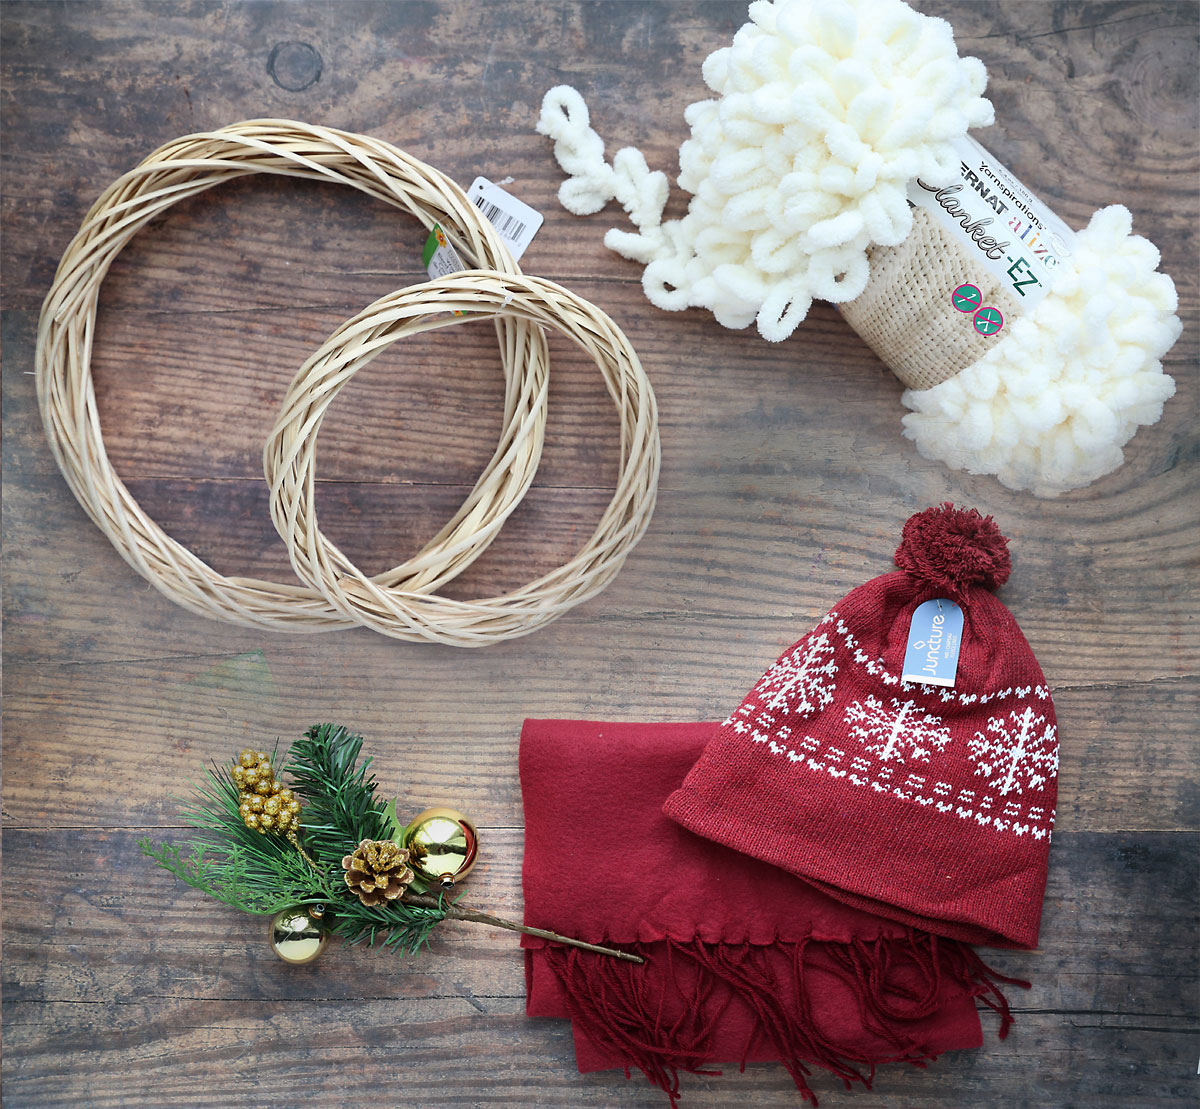 Supplies: two wreath forms, white loop yarn, hat and scarf, winter floral pick